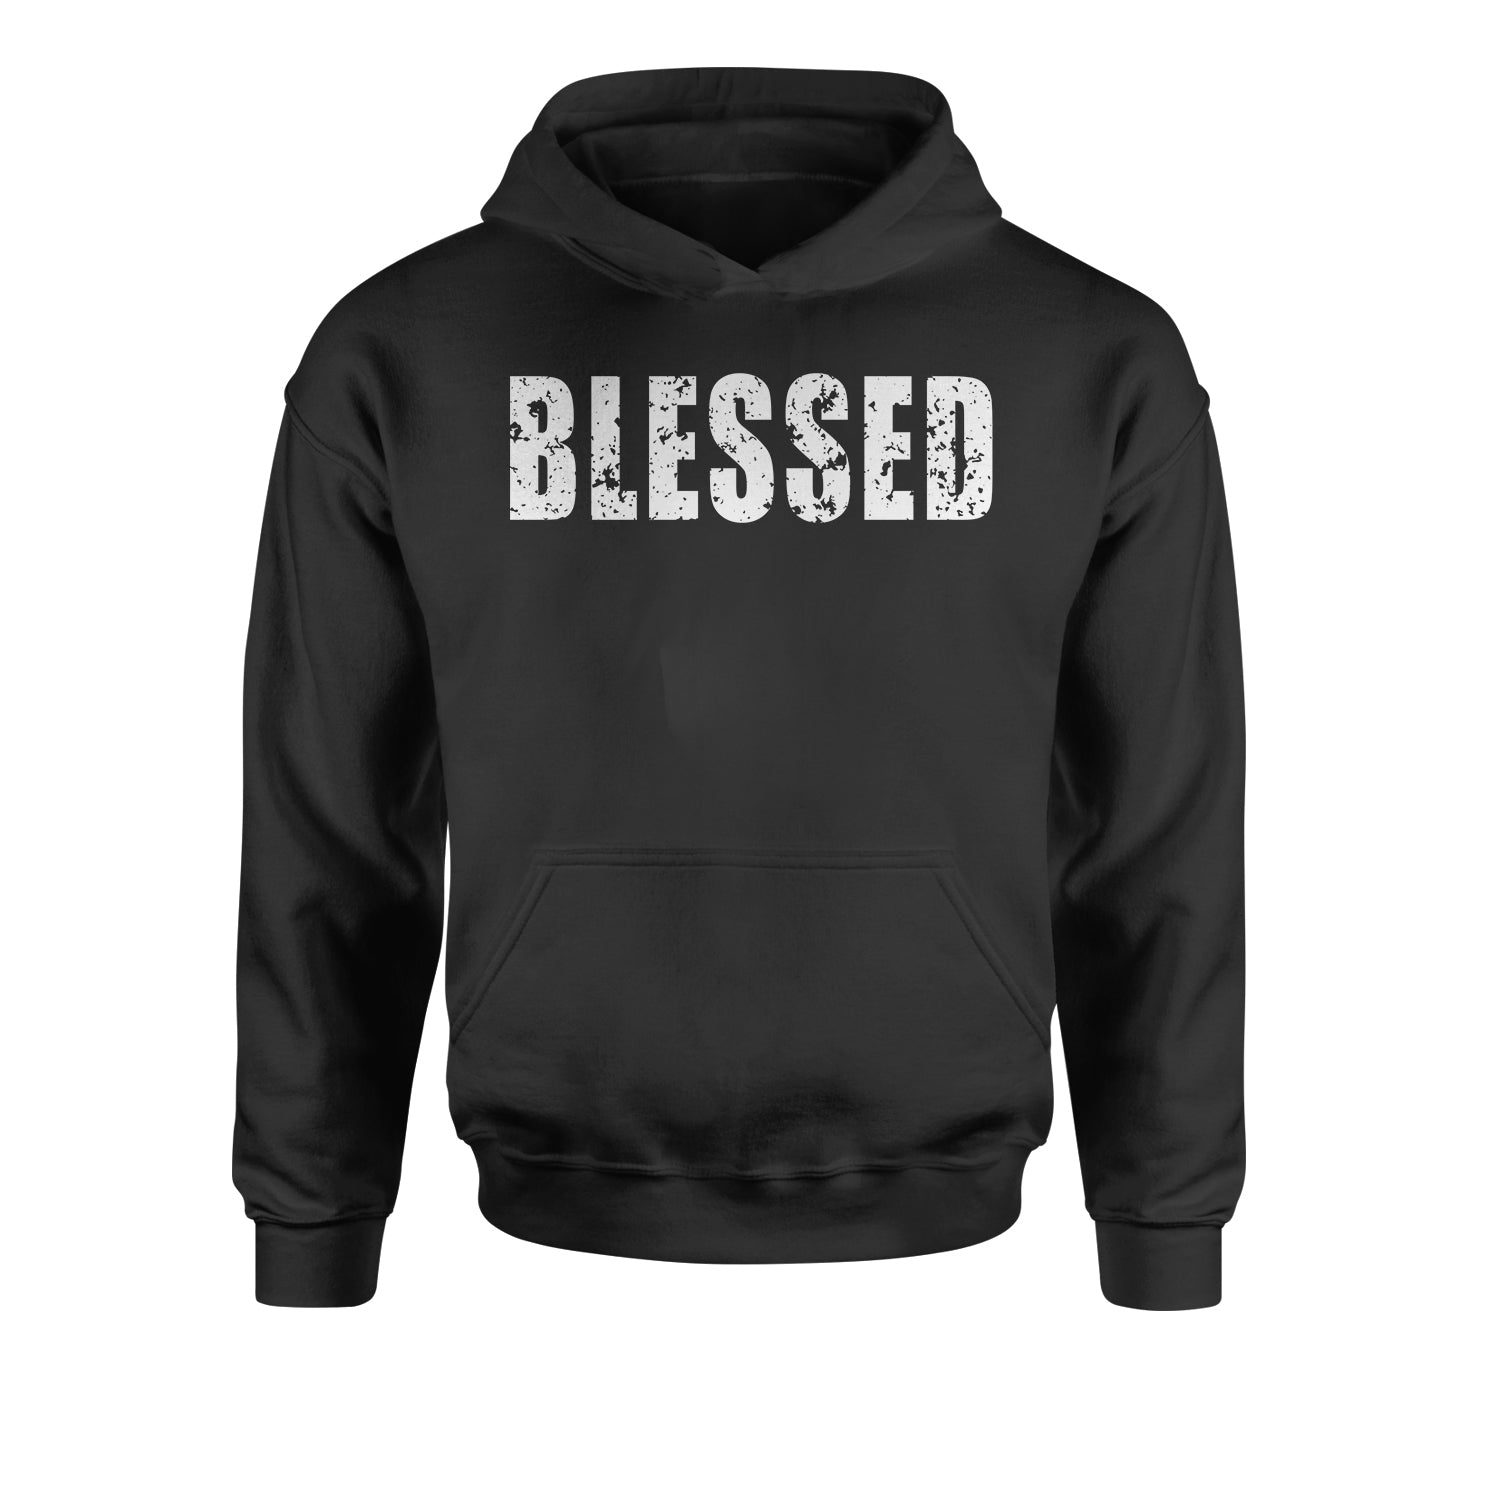 Blessed Religious Grateful Thankful Youth-Sized Hoodie #expressiontees by Expression Tees